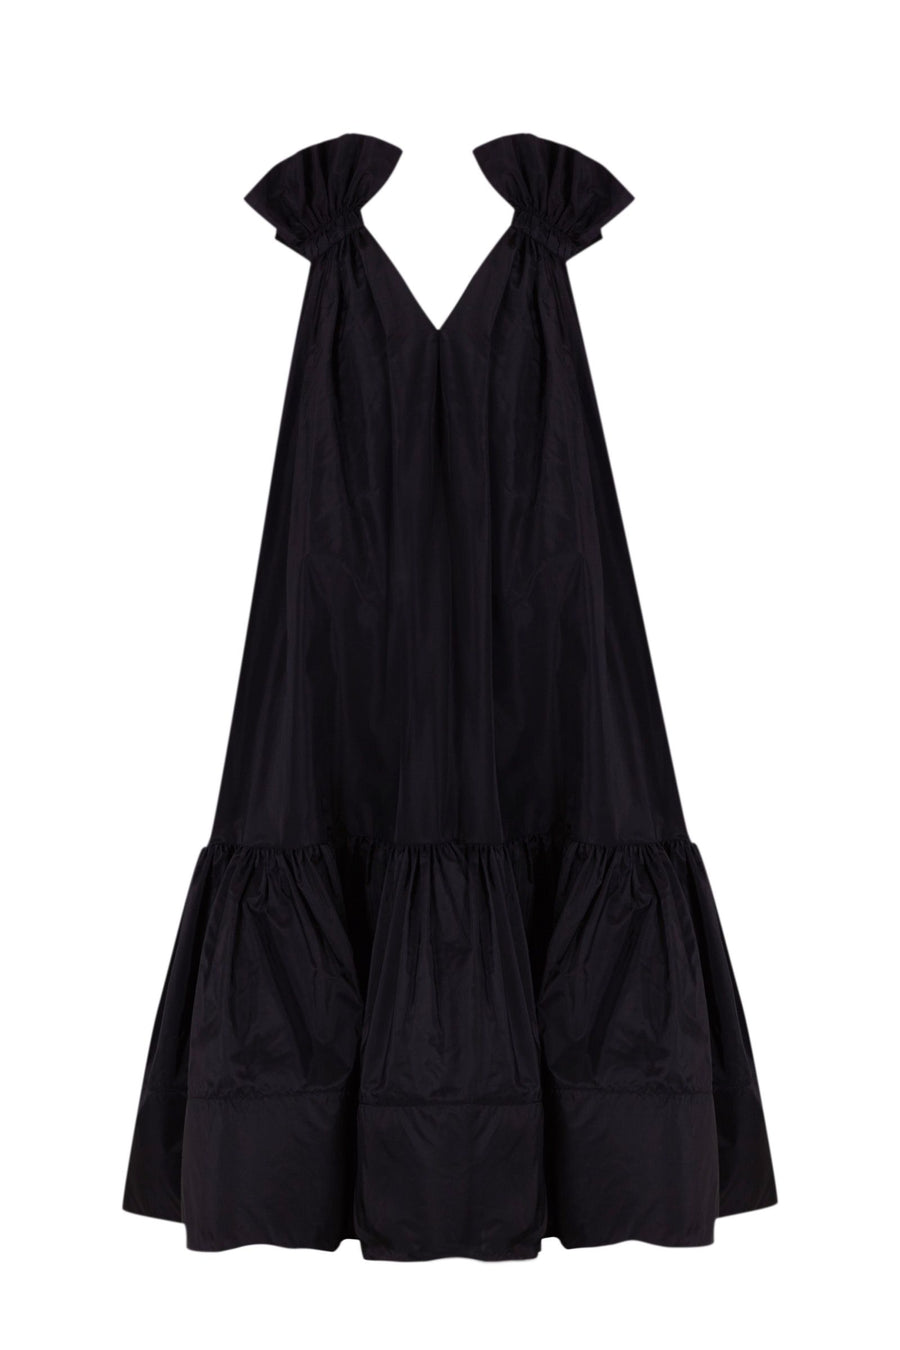 THE 2ND SKIN MIDI TAFFETA BOW DRESS WITH STRAPS. Available in two colours - Black and Pink